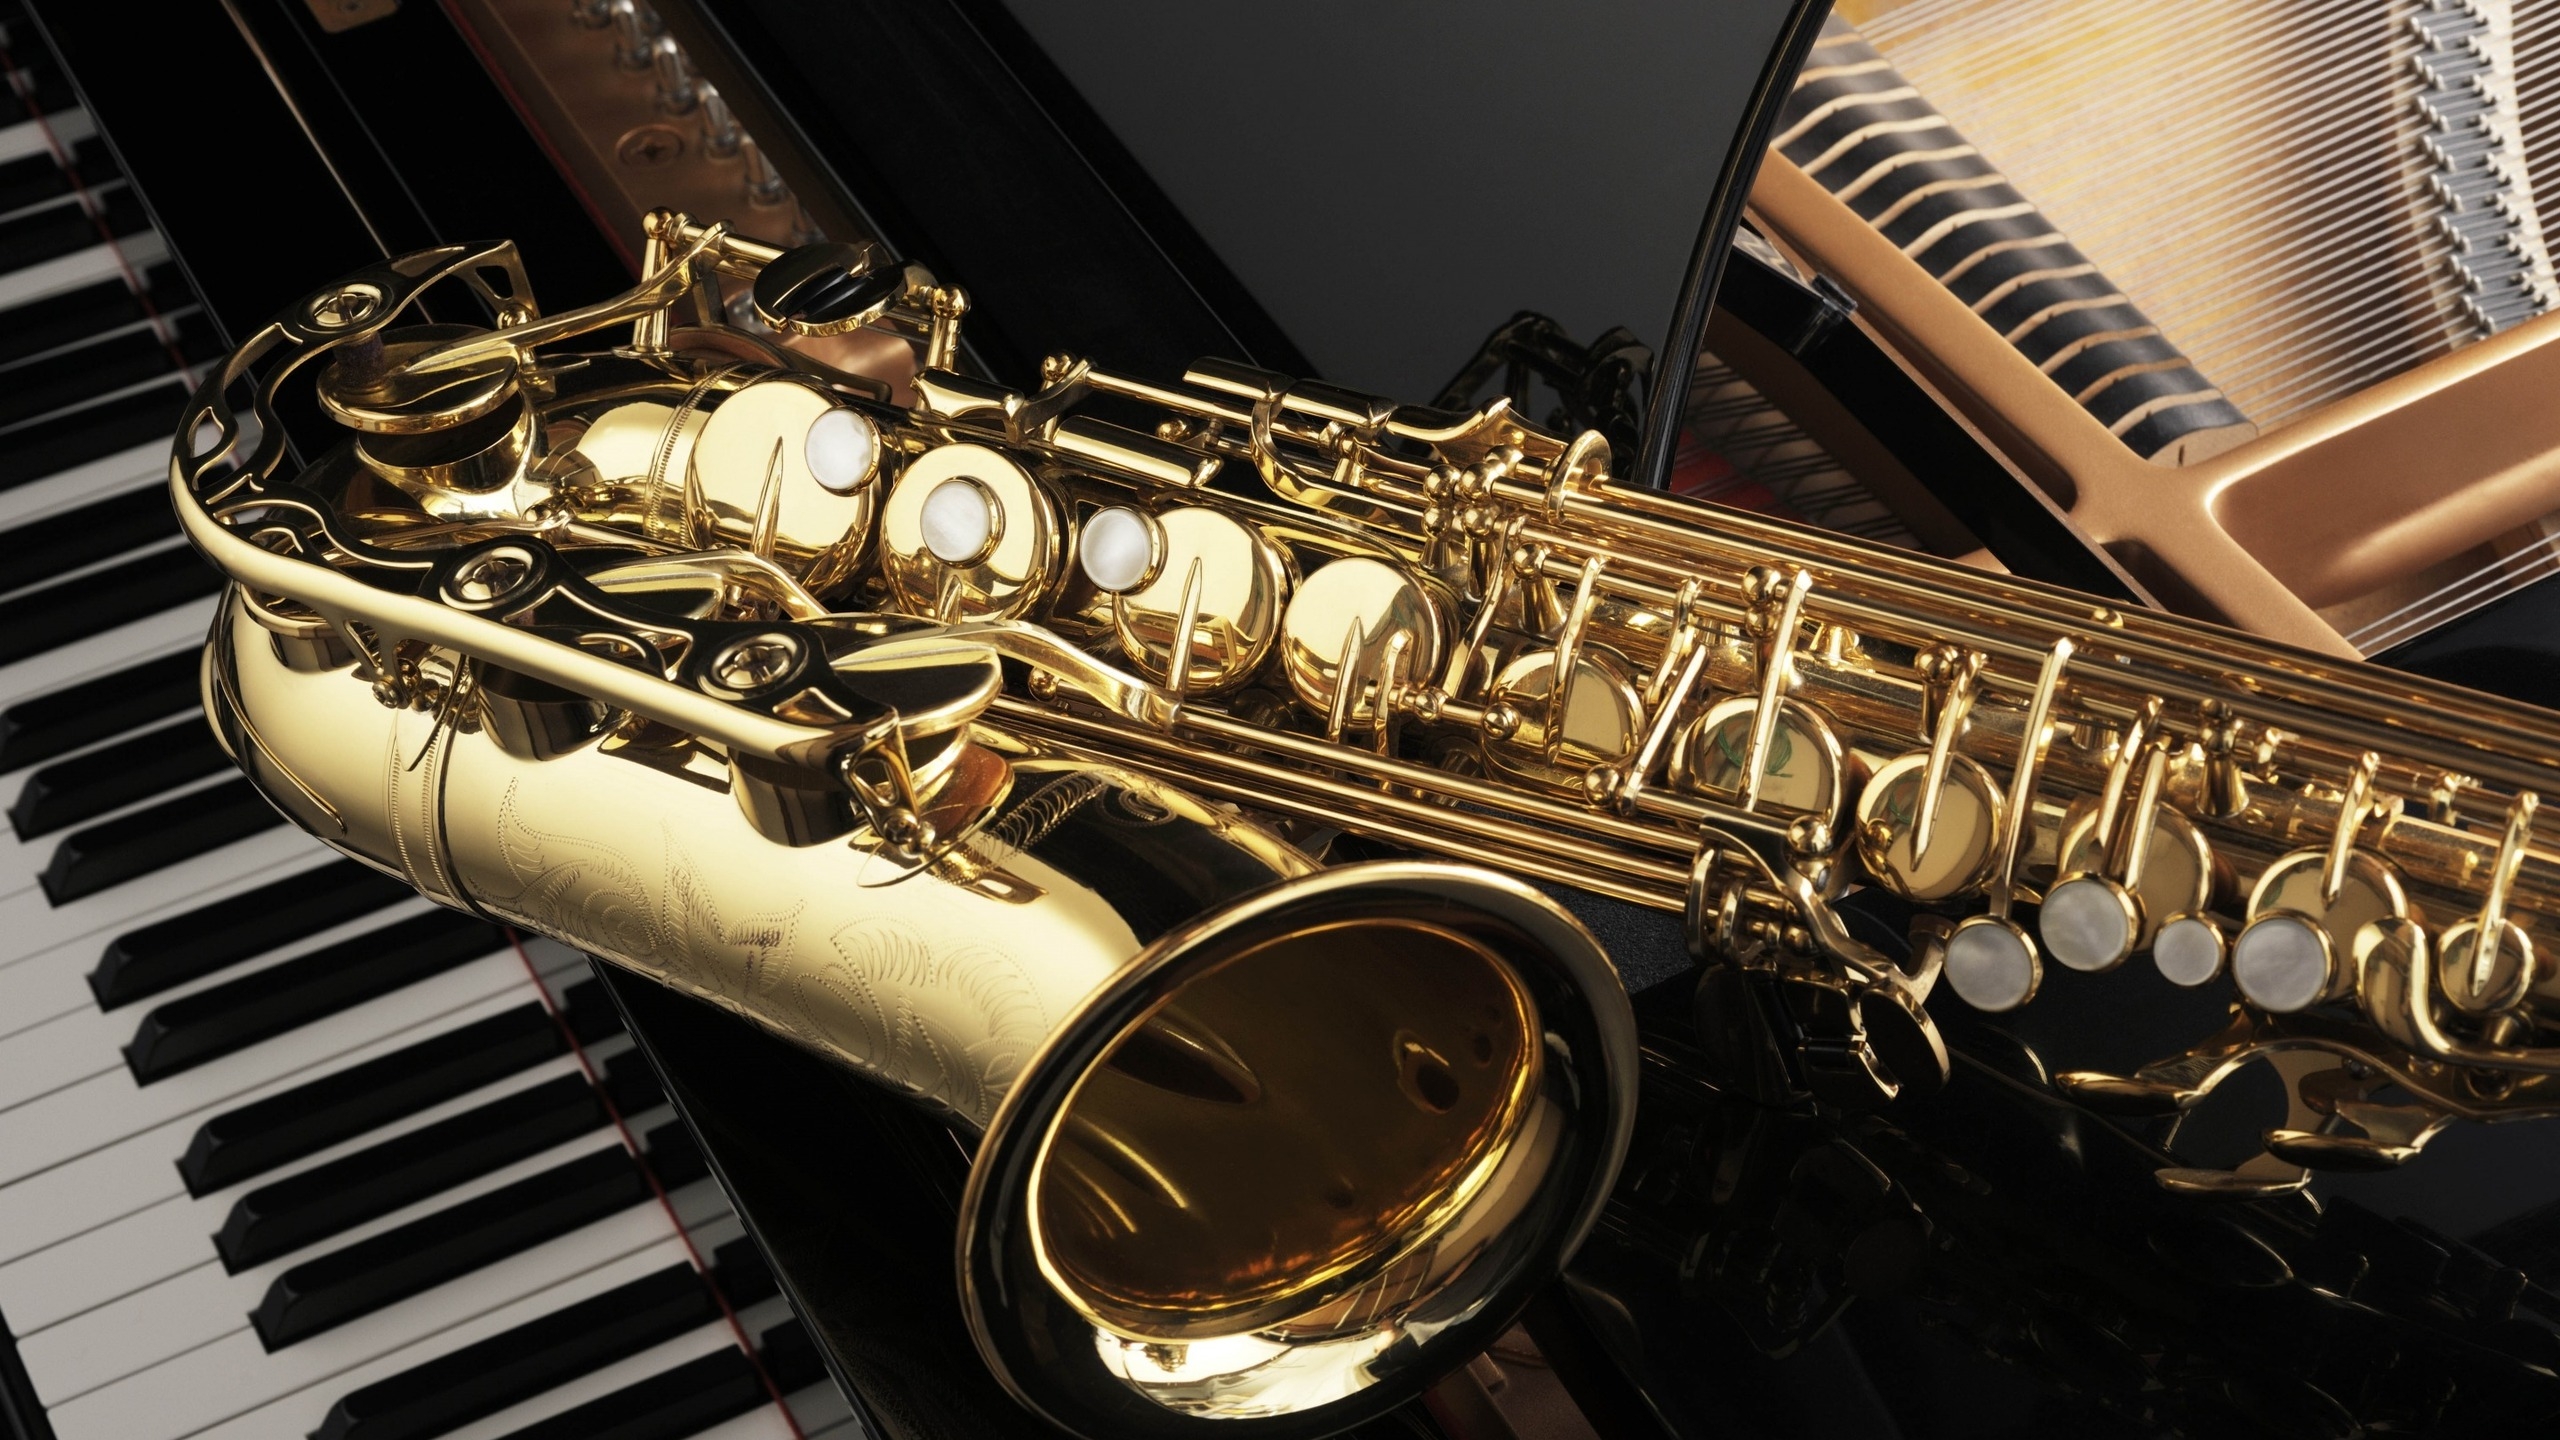 Saxophone and Piano for 2560x1440 HDTV resolution